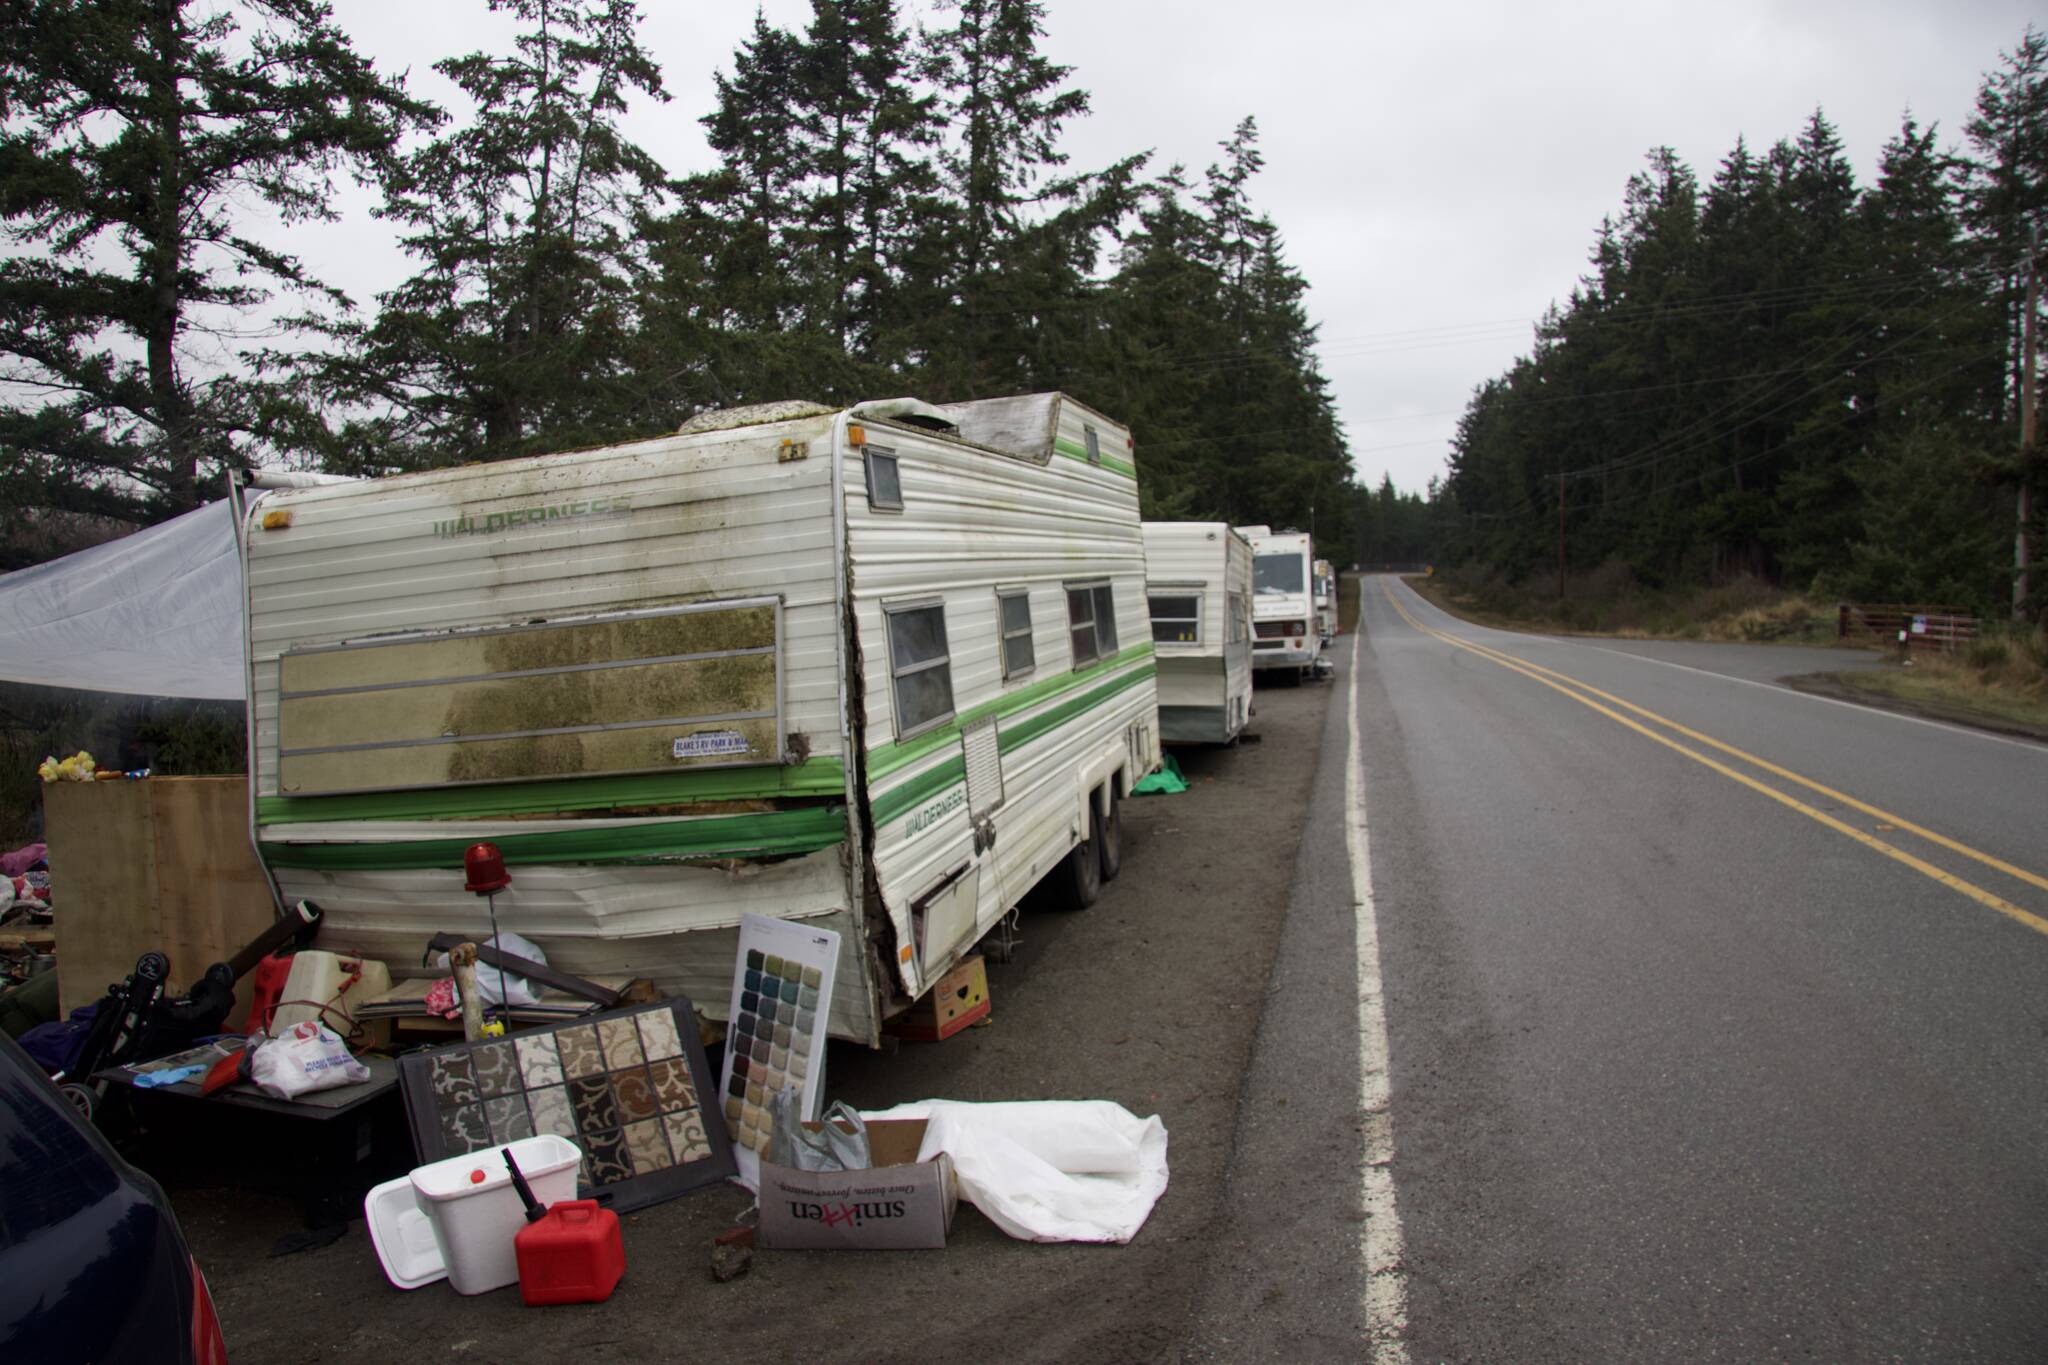 Photo by Rachel Rosen/Whidbey News-Times
Two clusters of RVs and vehicles are permanently parked on either side of Hoffman Road.